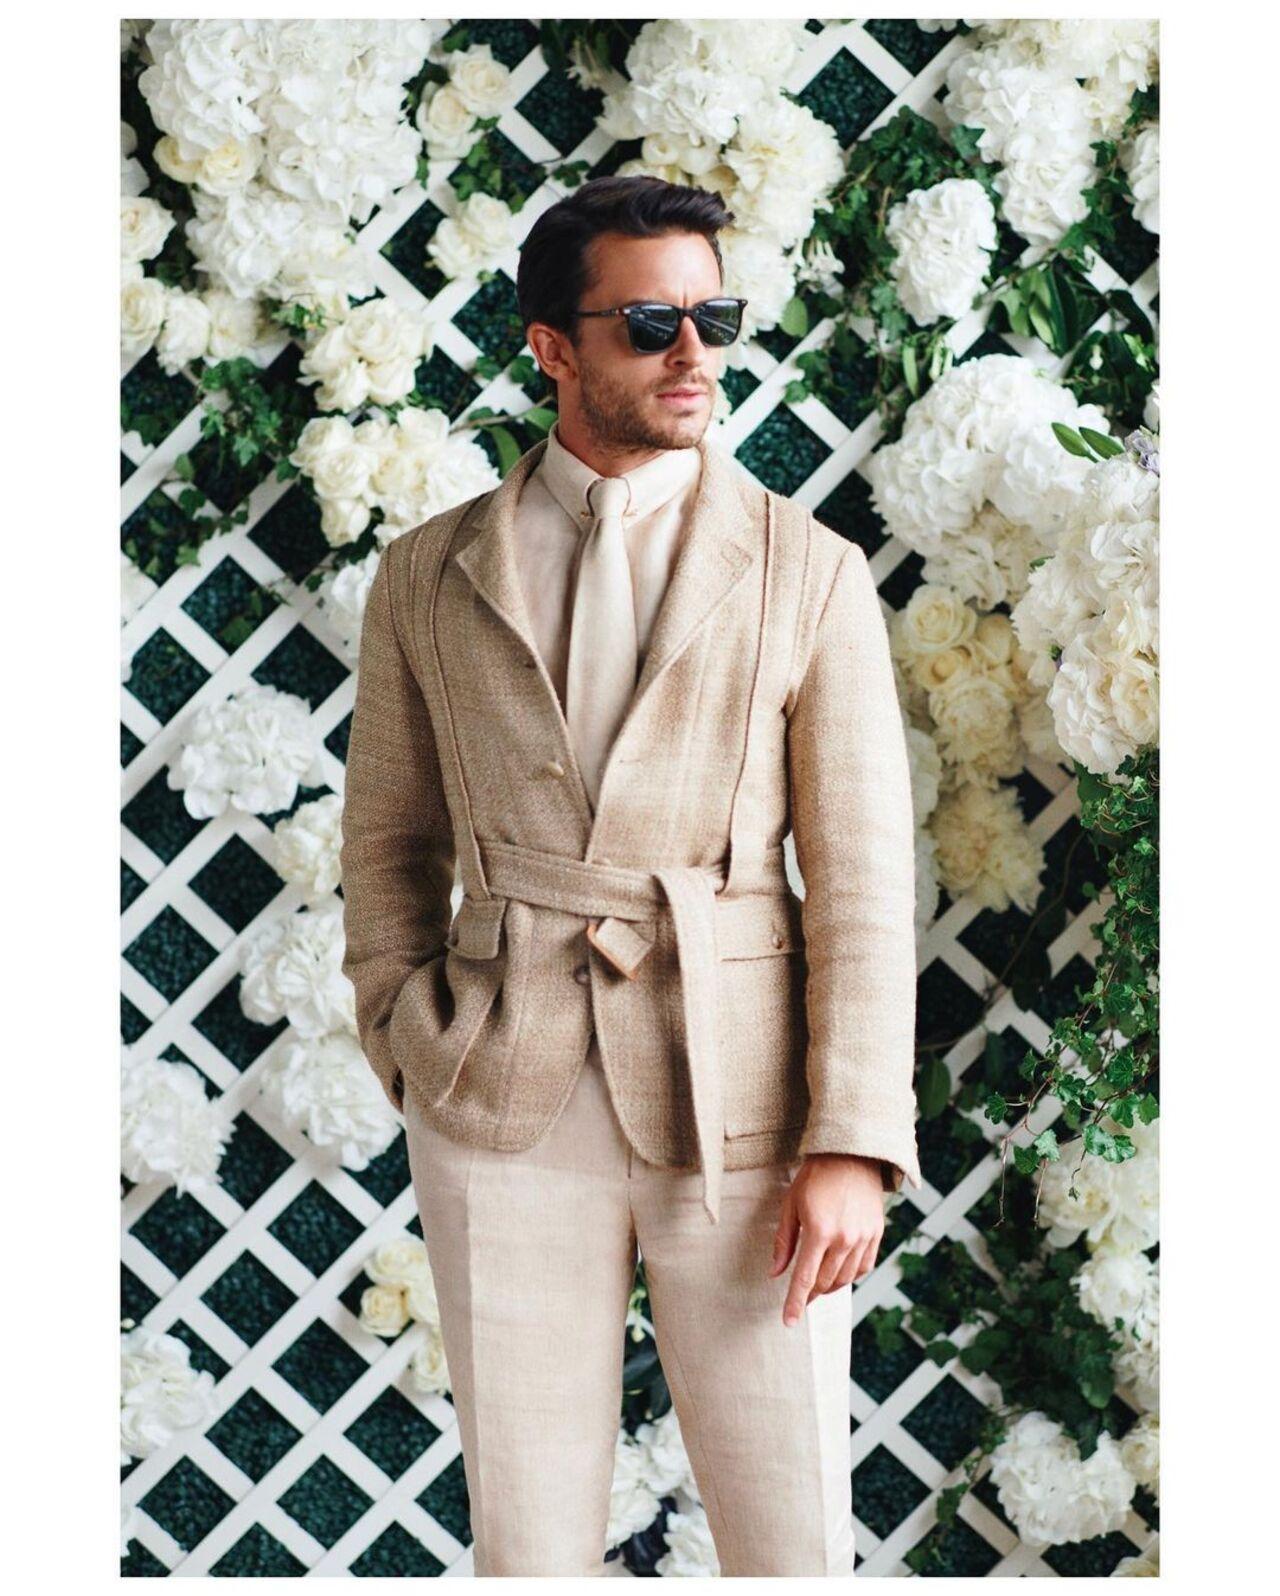 The Bridgerton star Jonathan Bailey who won hearts with his performance as Anthony Bridgerton is also known for serving looks. For his Wimbeldon look, he opted for a three piece suit by Ralph Lauren and paired it with classic sunnies